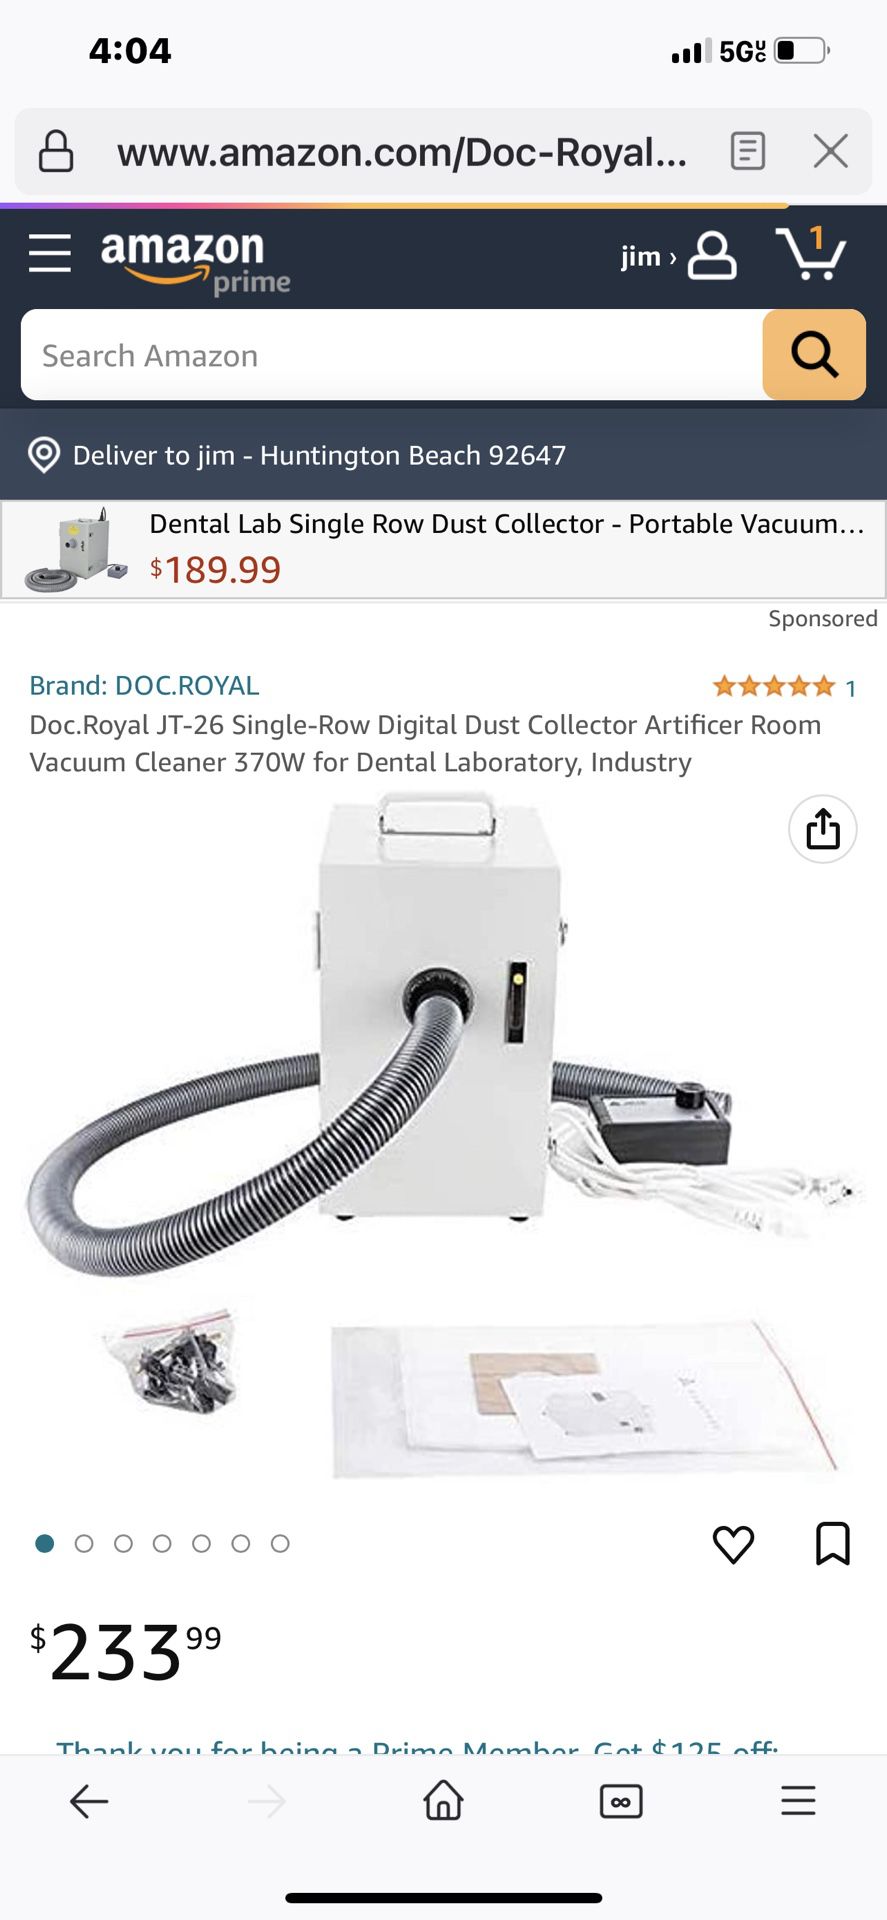 Doc. Royal JT-26 Single-Row Digital Dust Collector Artificer Room Vacuum  Cleaner 370W for Dental Laboratory, Industry for Sale in Stanton, CA  OfferUp